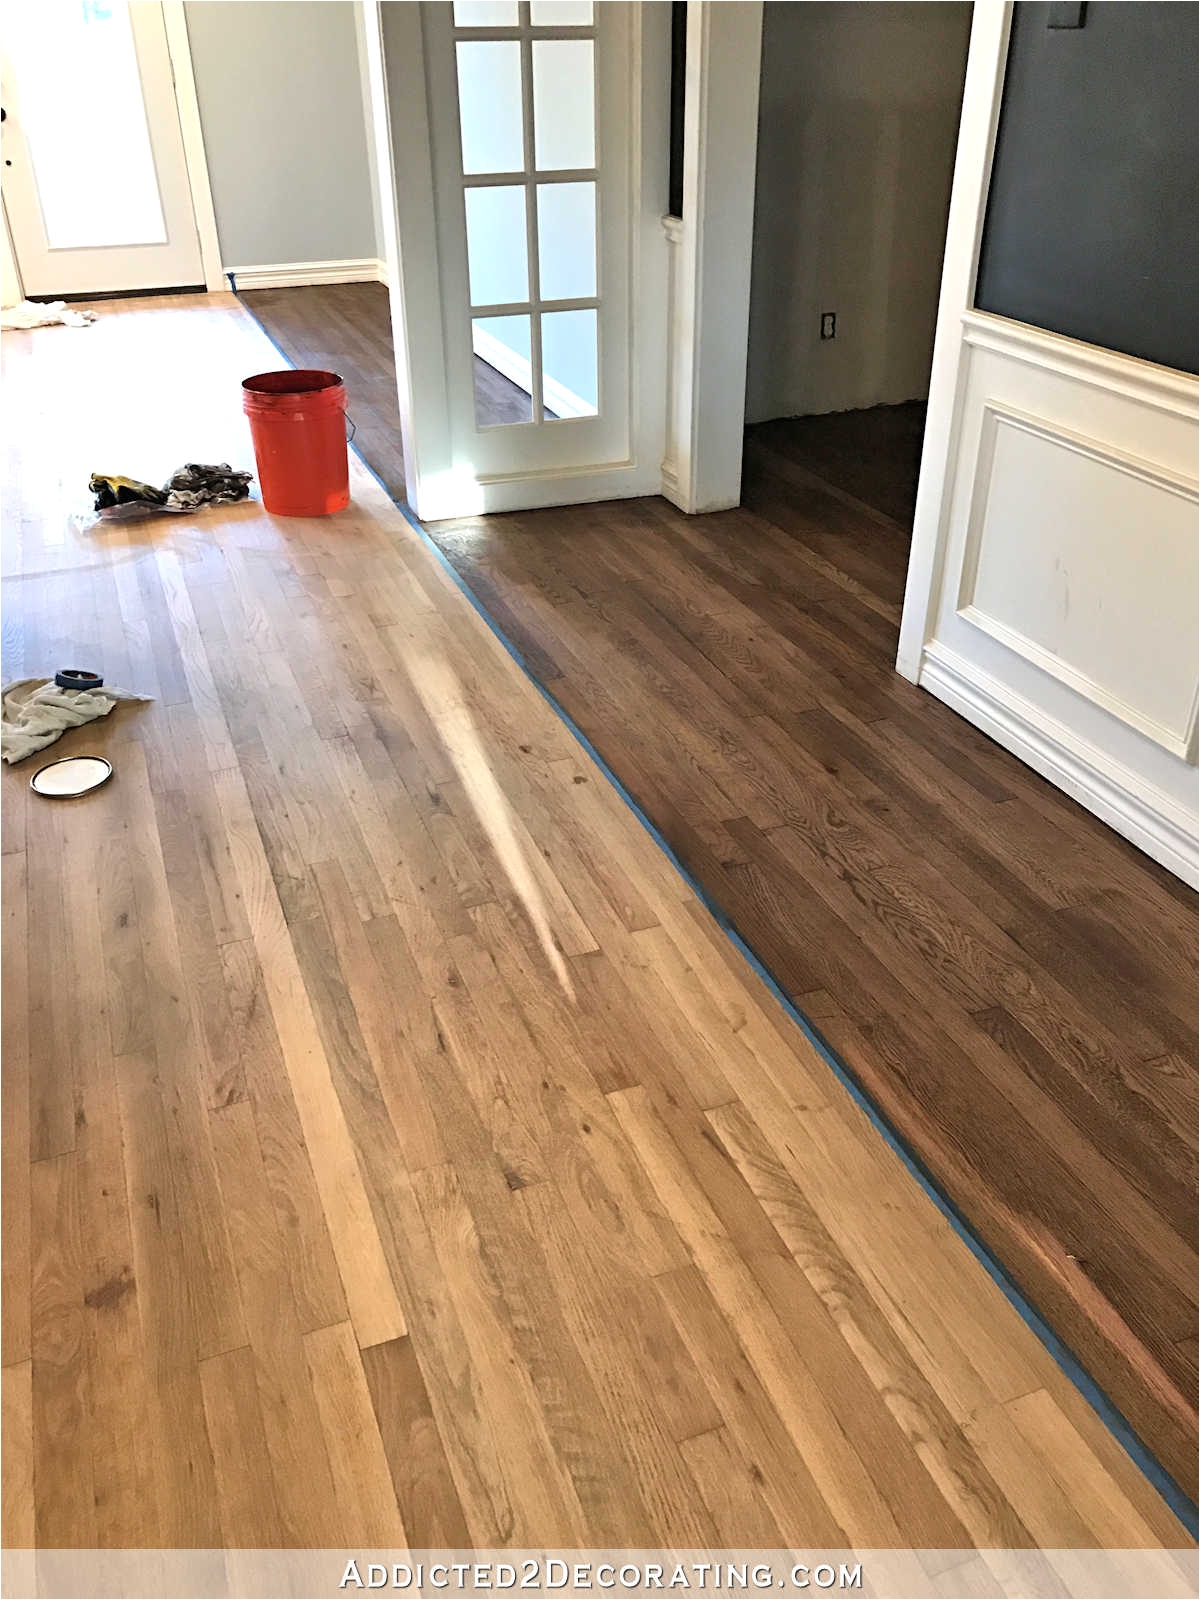 staining red oak hardwood floors 6 stain on partial floor in entryway and music